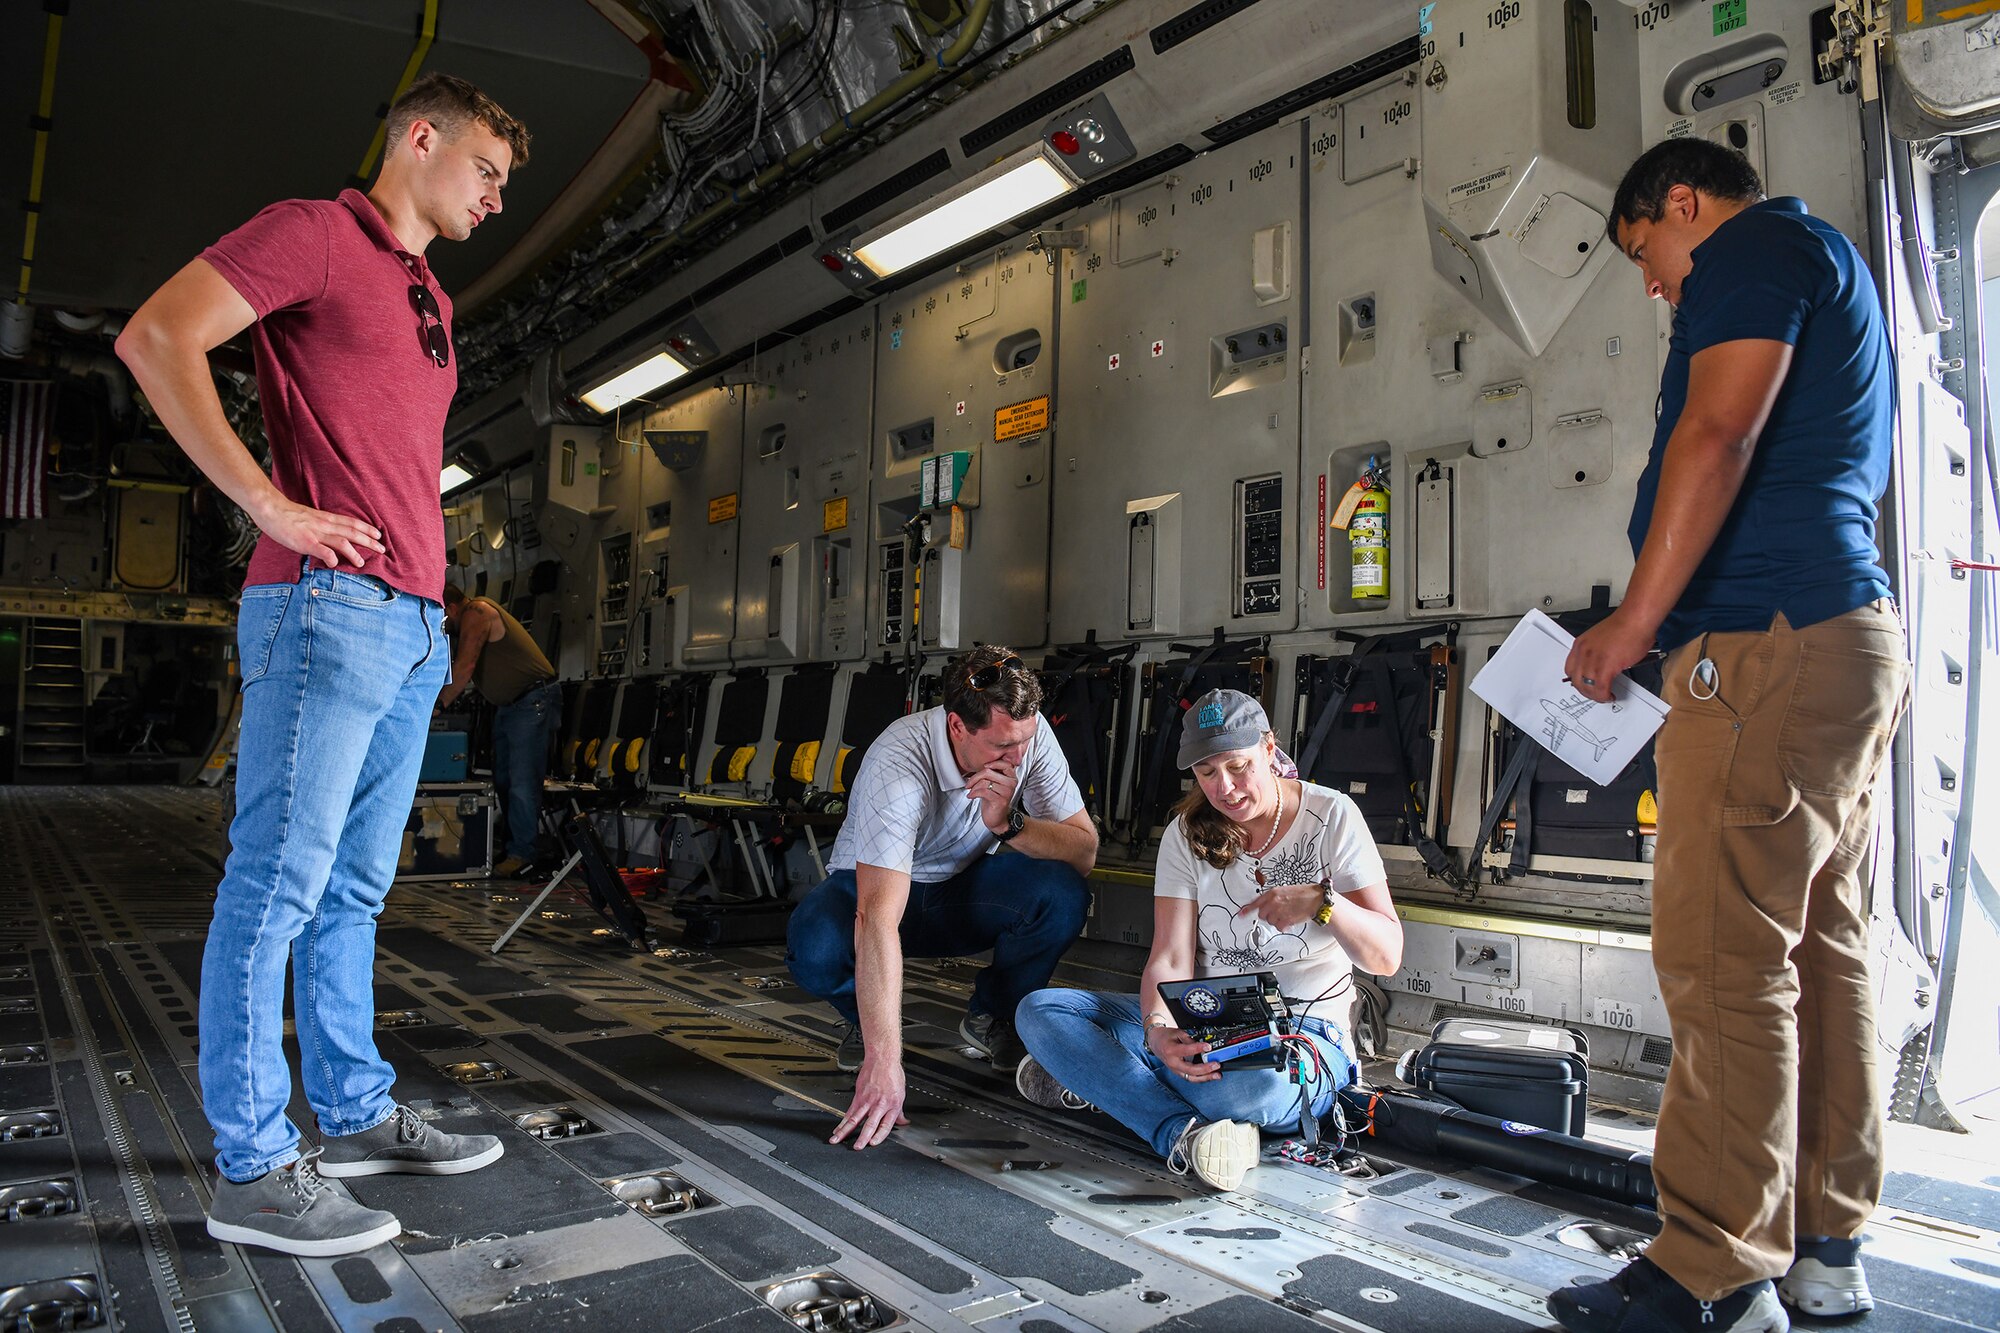 A team from the Air Force Institute of Technology, Air Force Research Lab, and Department of the Air Force/Massachusetts Institute of Technology Artificial Intelligence Accelerator prepare a Mag in a Box, a navigation system for GPS denied environments, for testing on a 445th Airlift Wing C-17 Globemaster III Aug 6, 2021. A team from the Air Force Institute of Technology, Air Force Research Lab, and Department of the Air Force/Massachusetts Institute of Technology Artificial Intelligence Accelerator are working on magnetic-navigation research and brought a stand-alone sensor to test on the C-17 help characterize the platform.